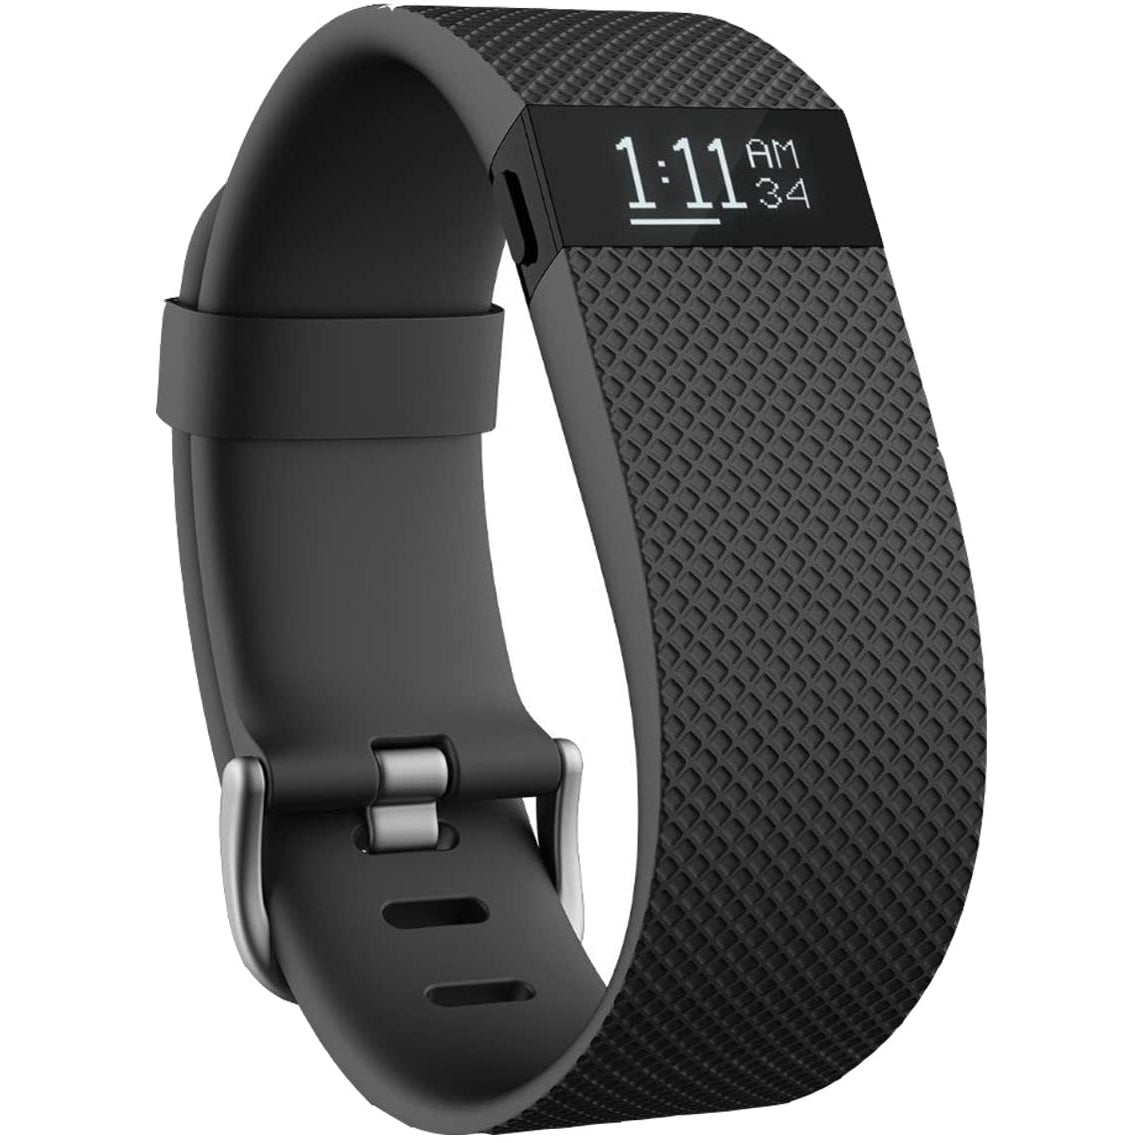 Fitbit Charge HR Heart Rate and Activity Wristband - Black - Refurbished Excellent